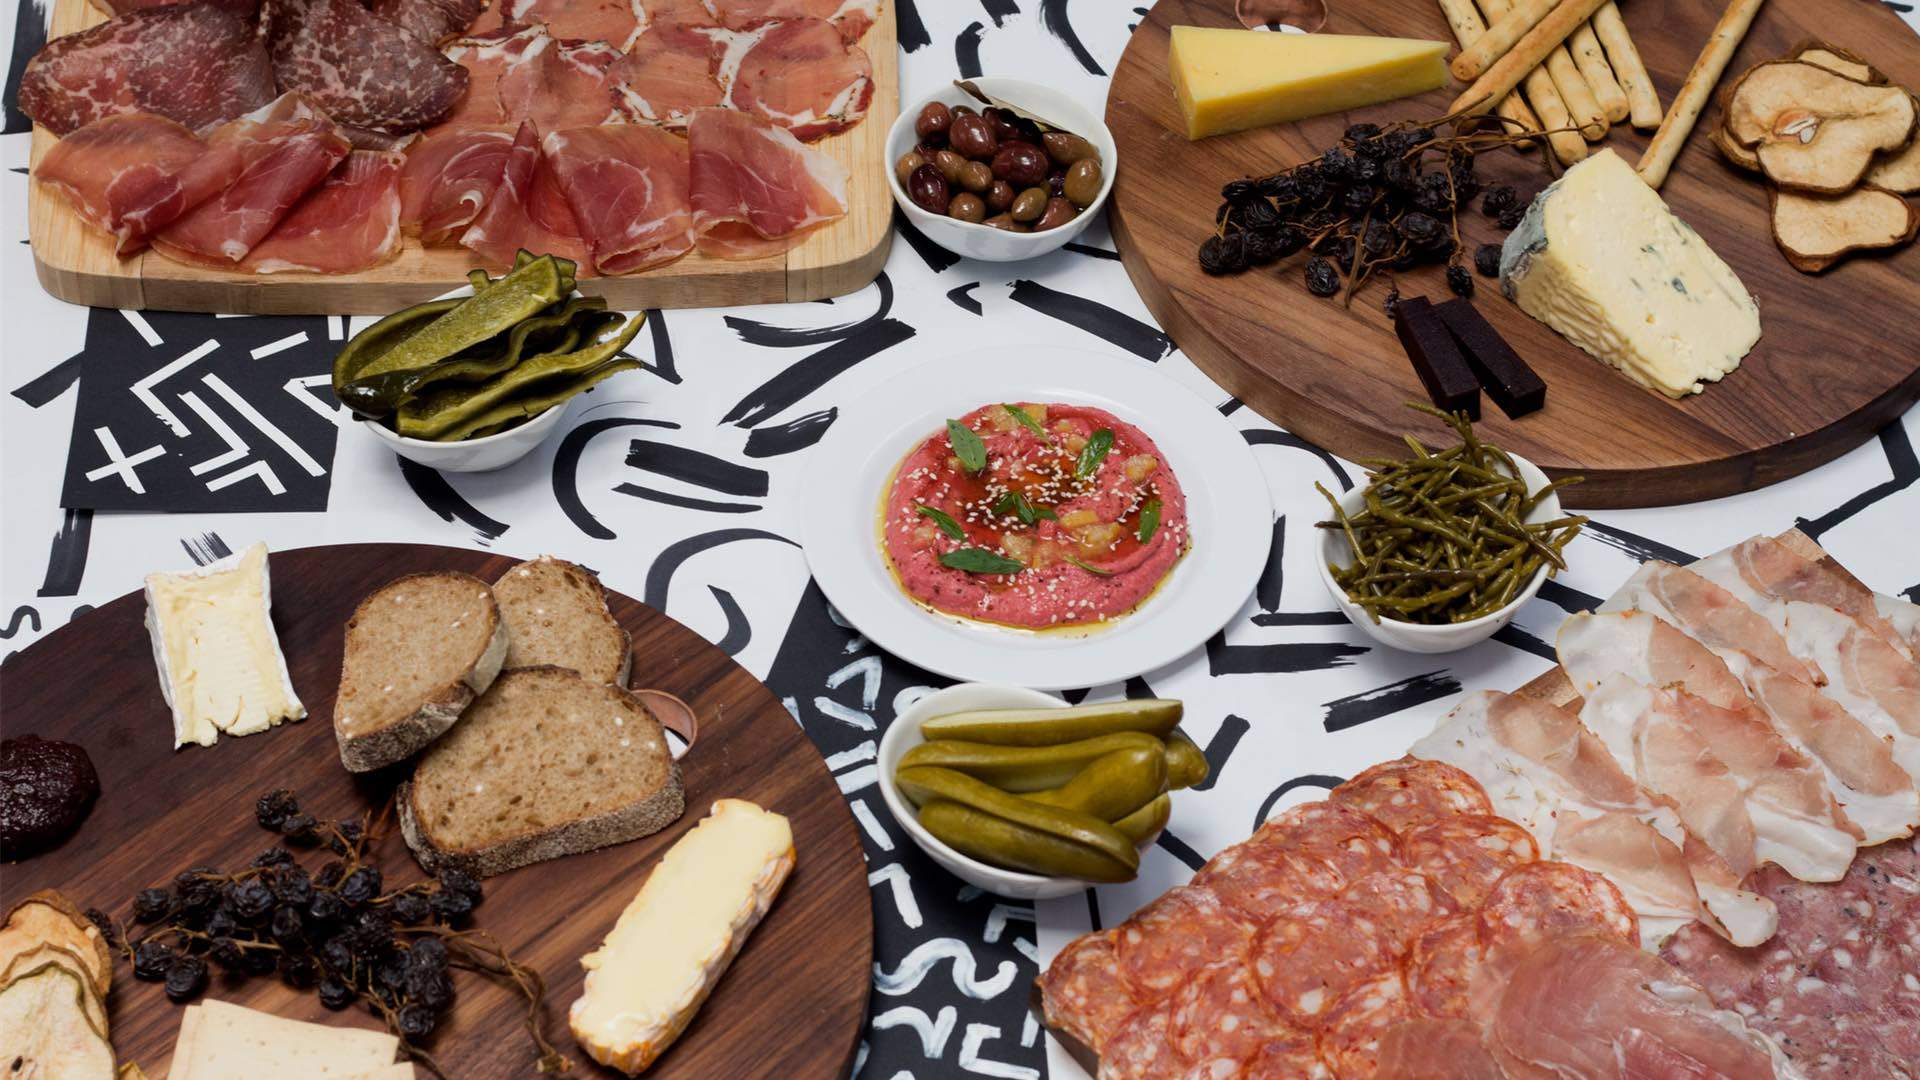 White Label Supper Club Will Deliver Cheese And Charcuterie To Your Door